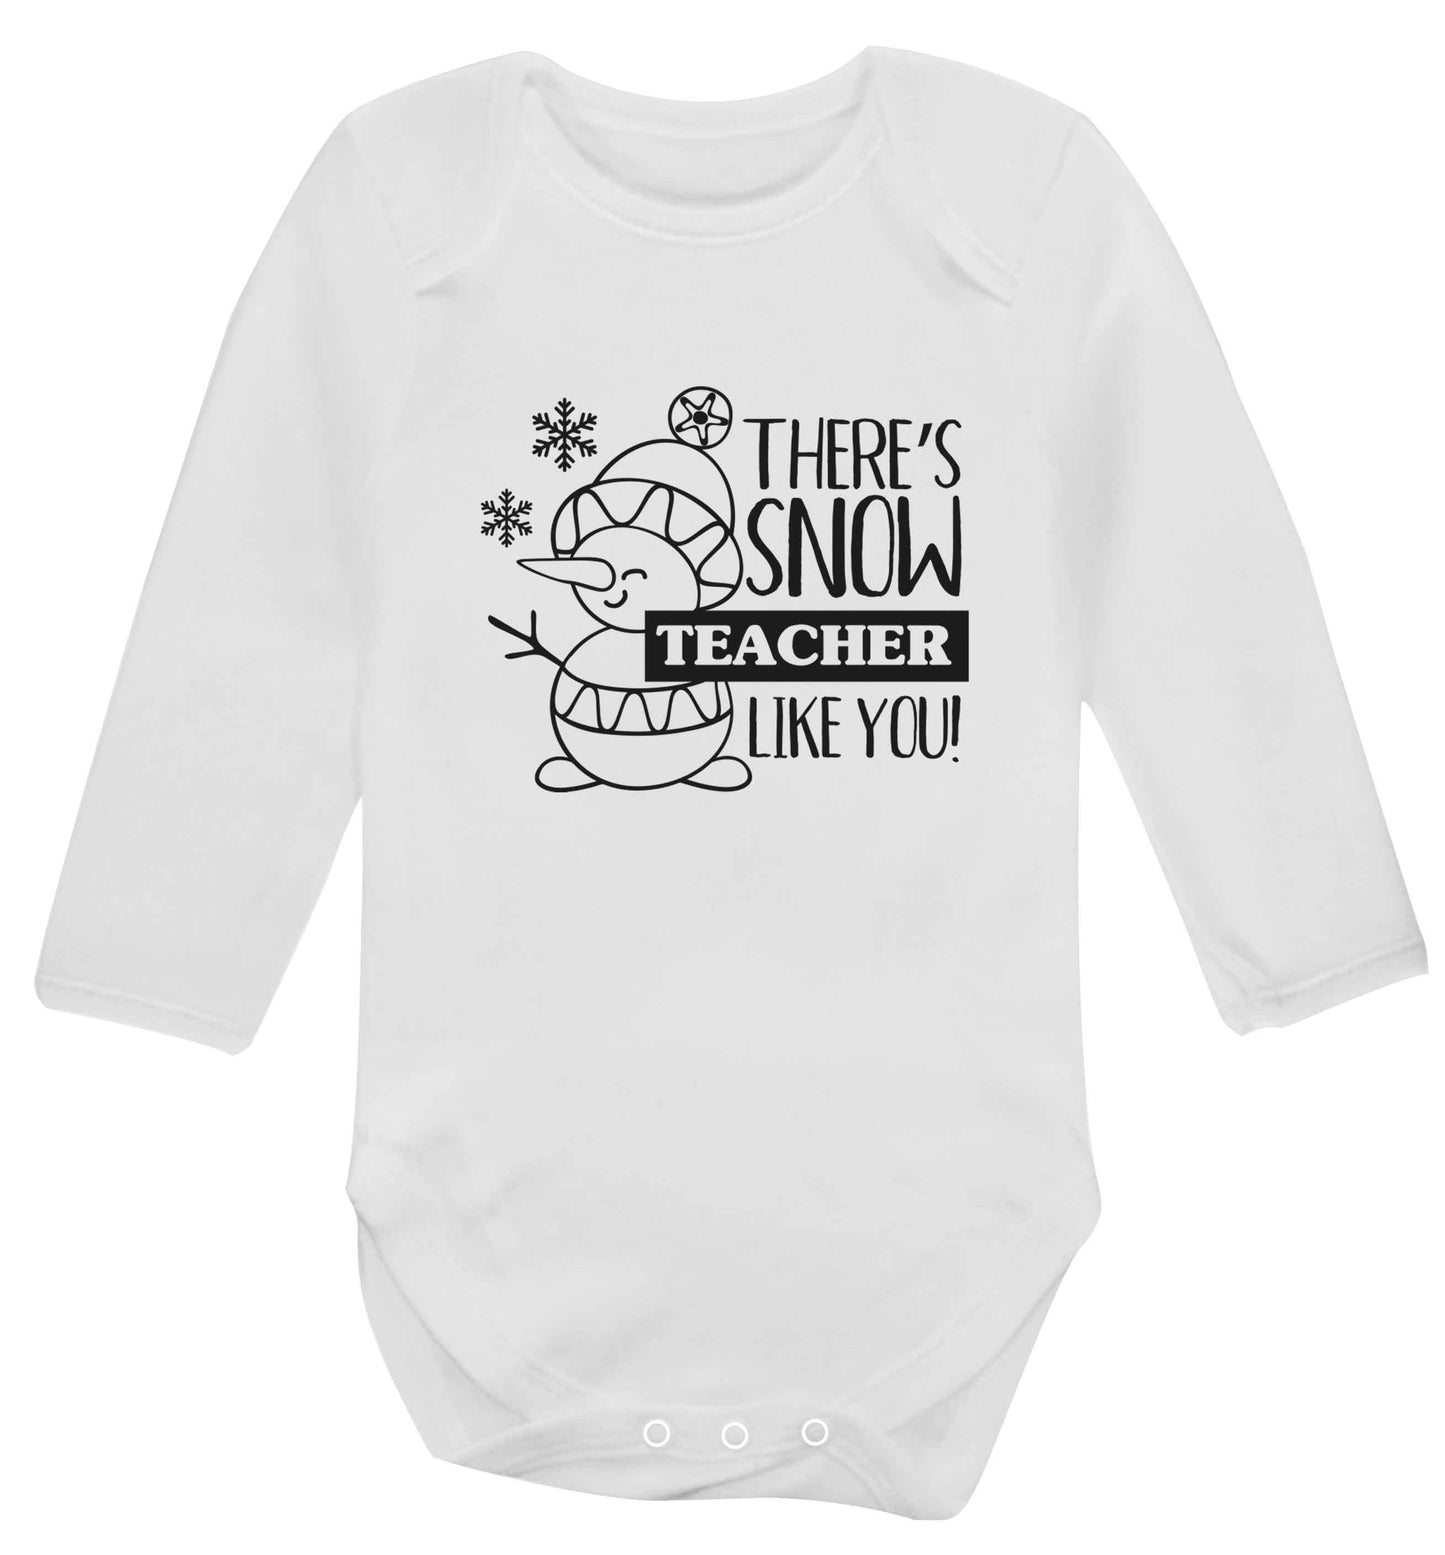 There's snow teacher like you baby vest long sleeved white 6-12 months